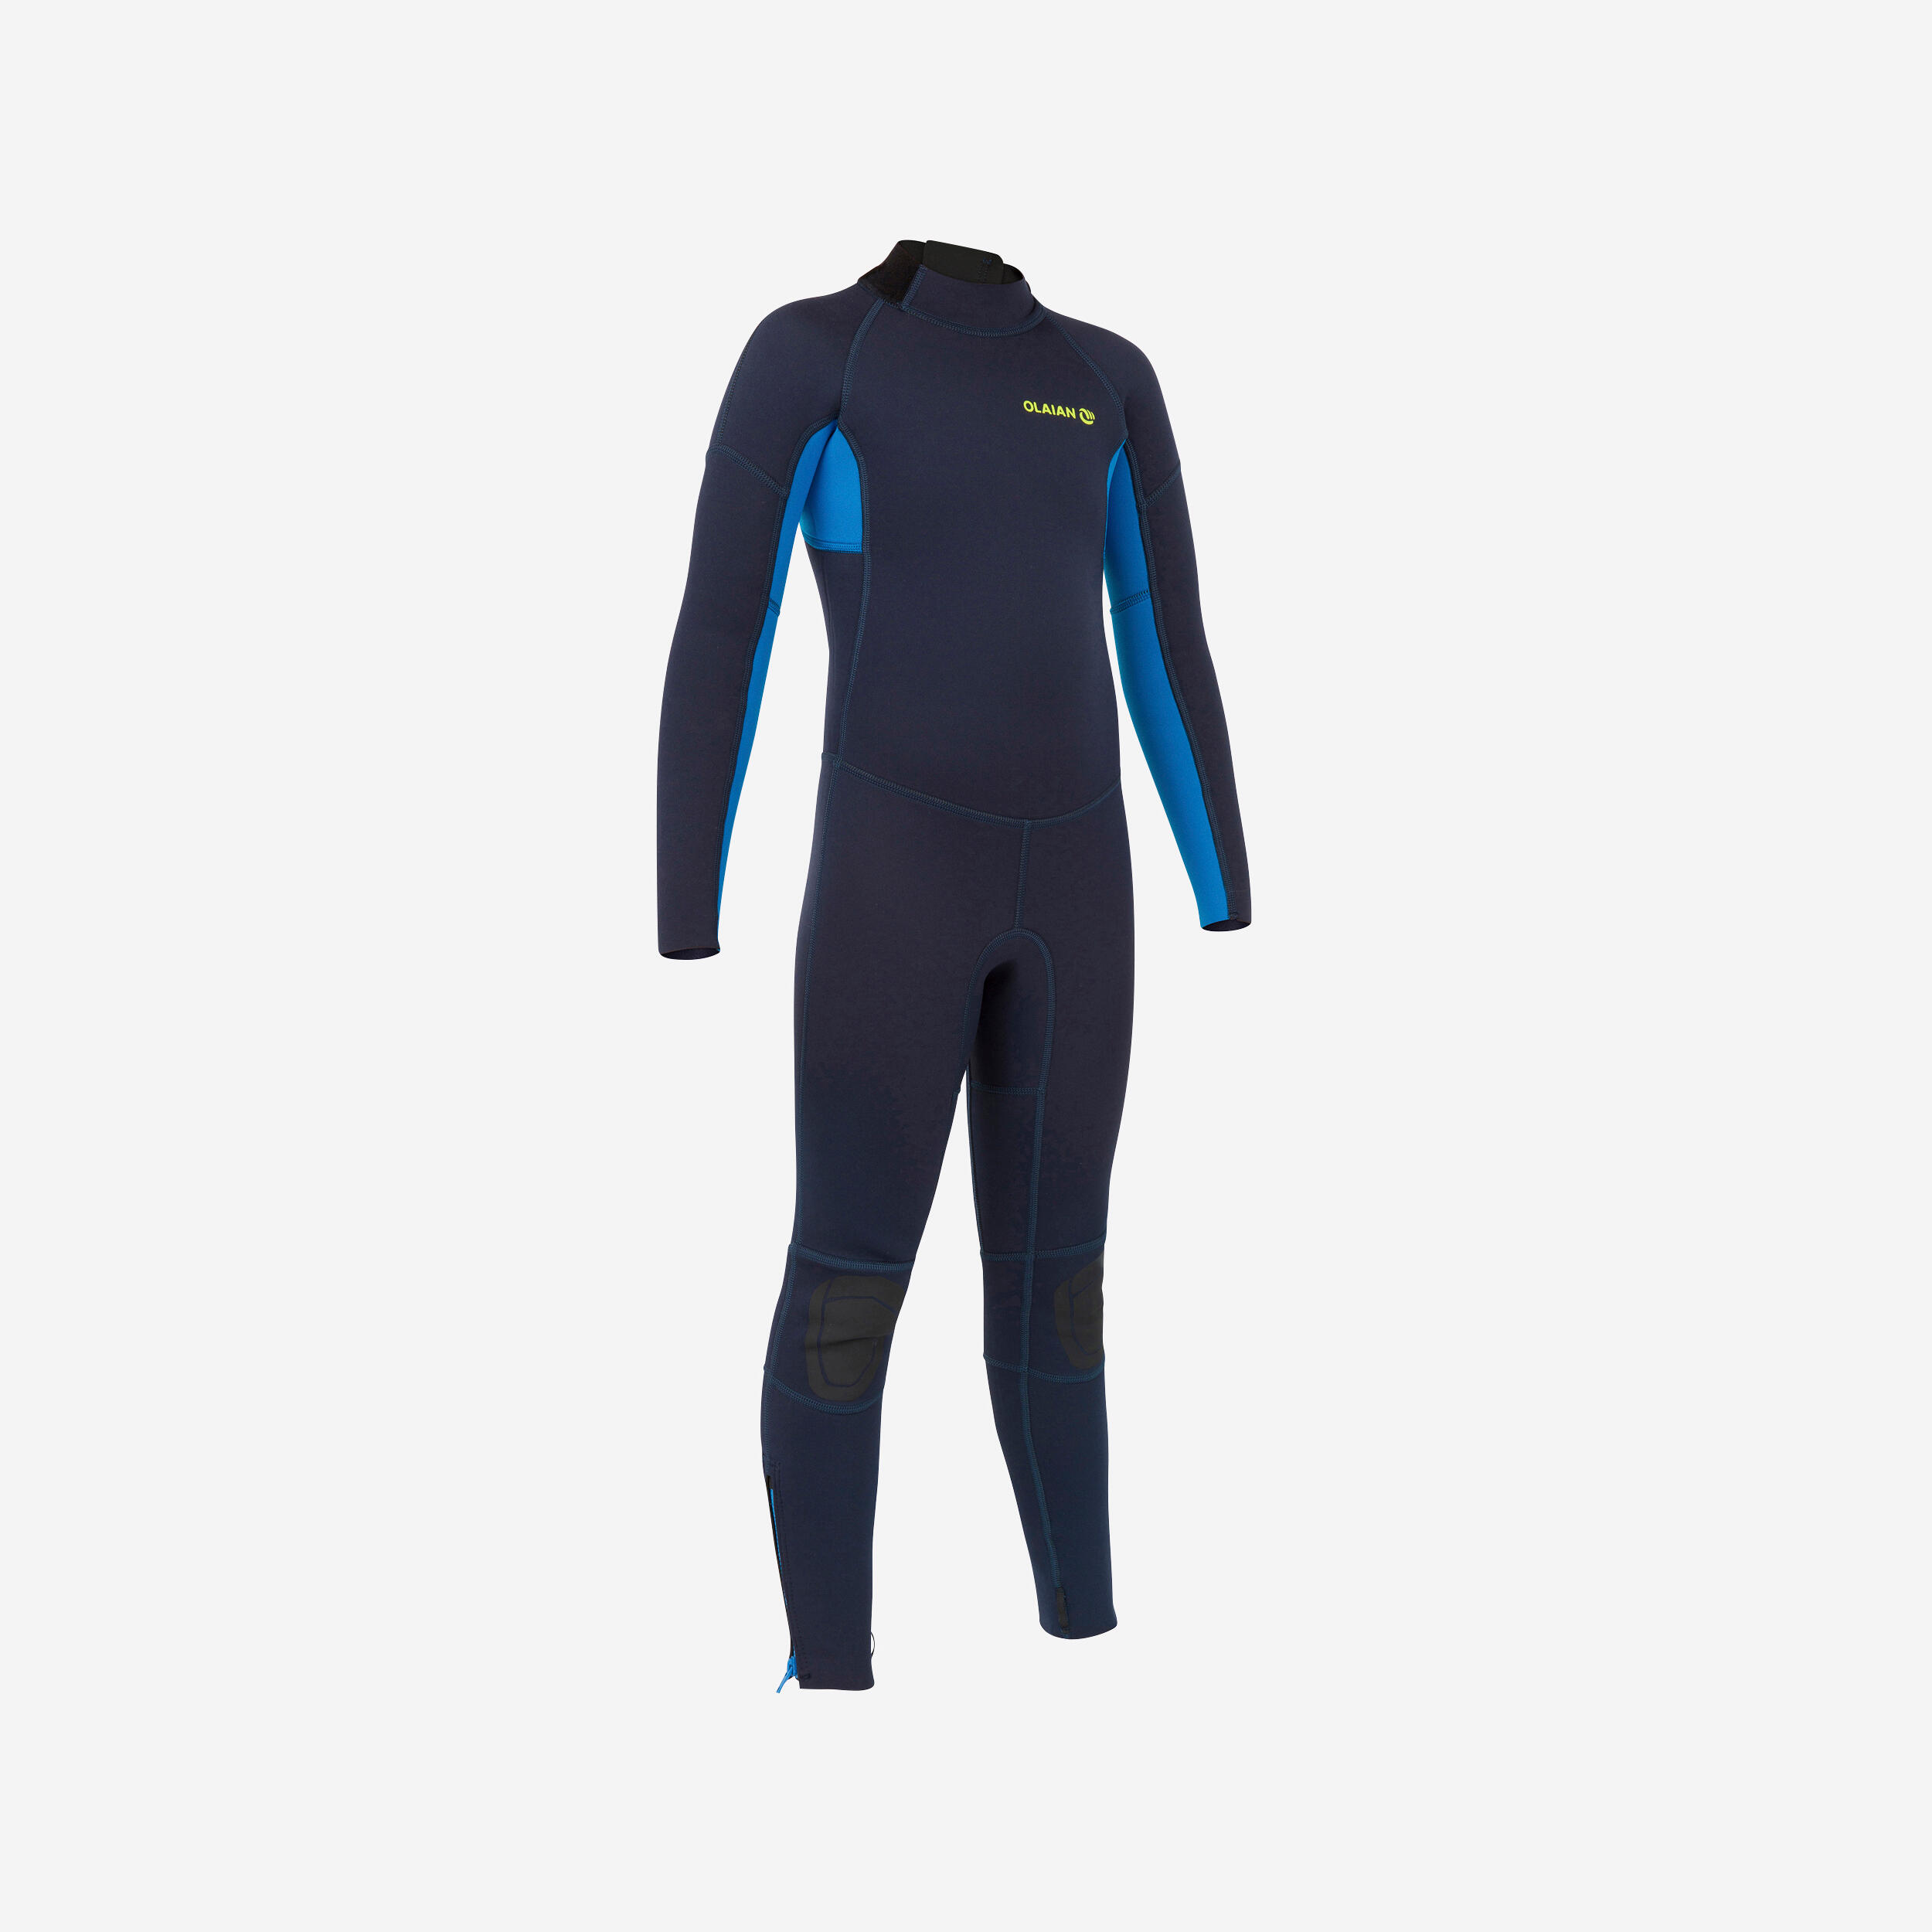 Women's 2/2 mm Wetsuit with Back Zip - 100 - Navy blue, Pale coral - Olaian  - Decathlon